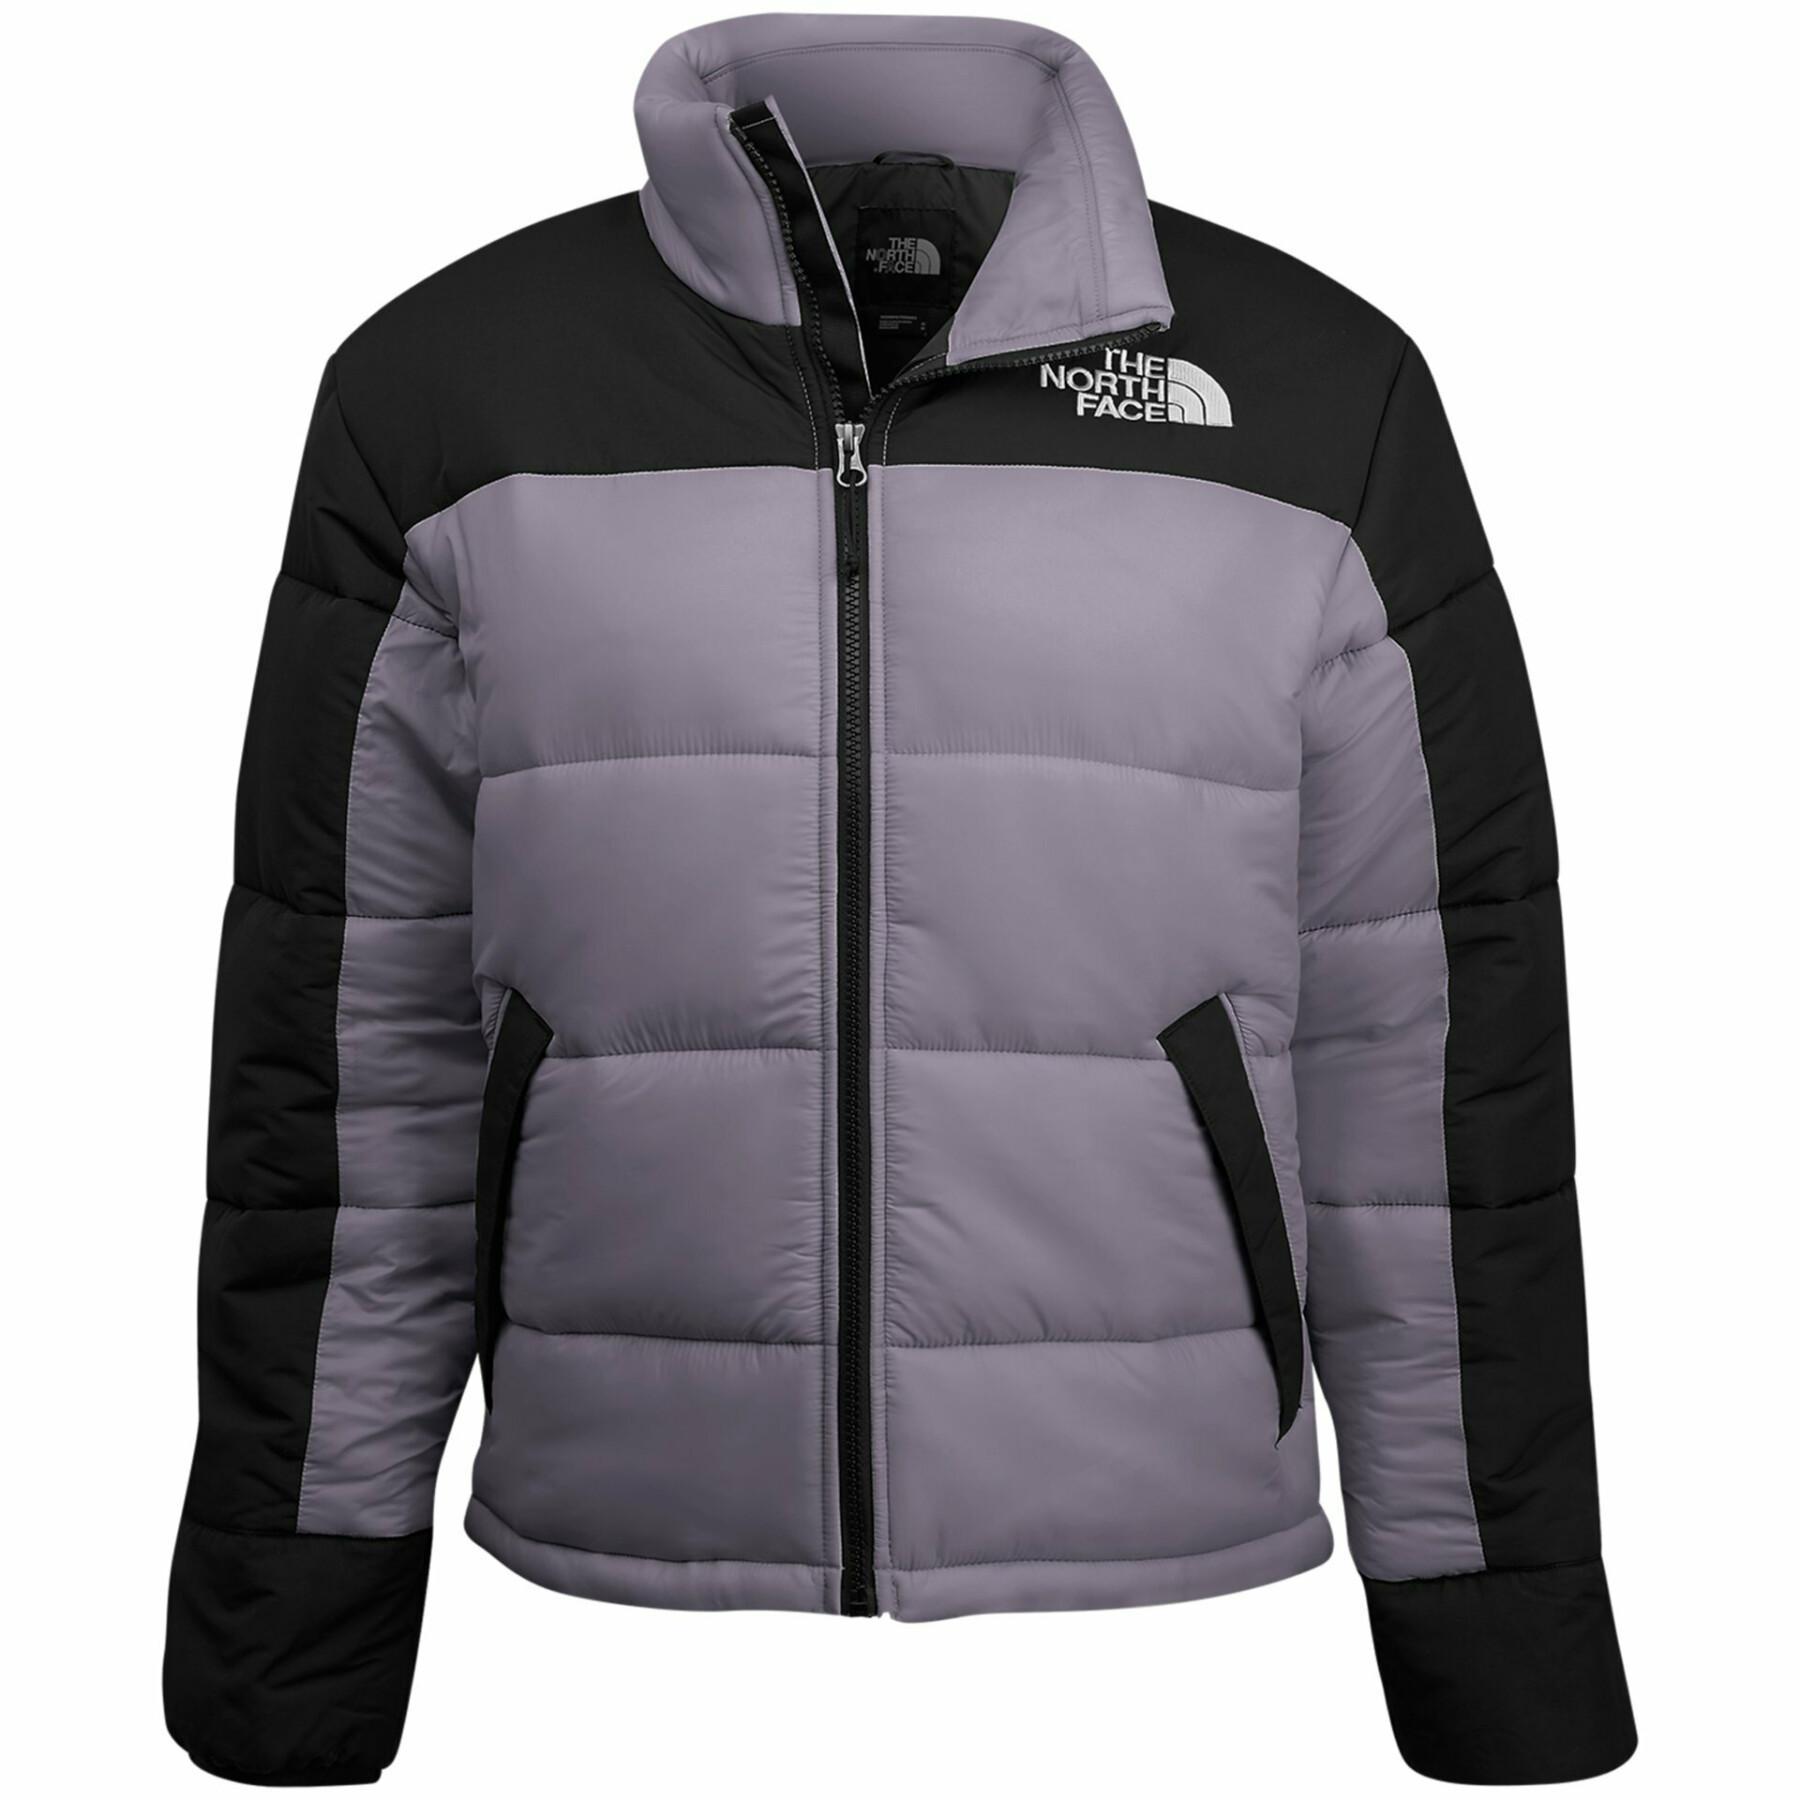 Women's jacket The North Face Hmlyn Insulated